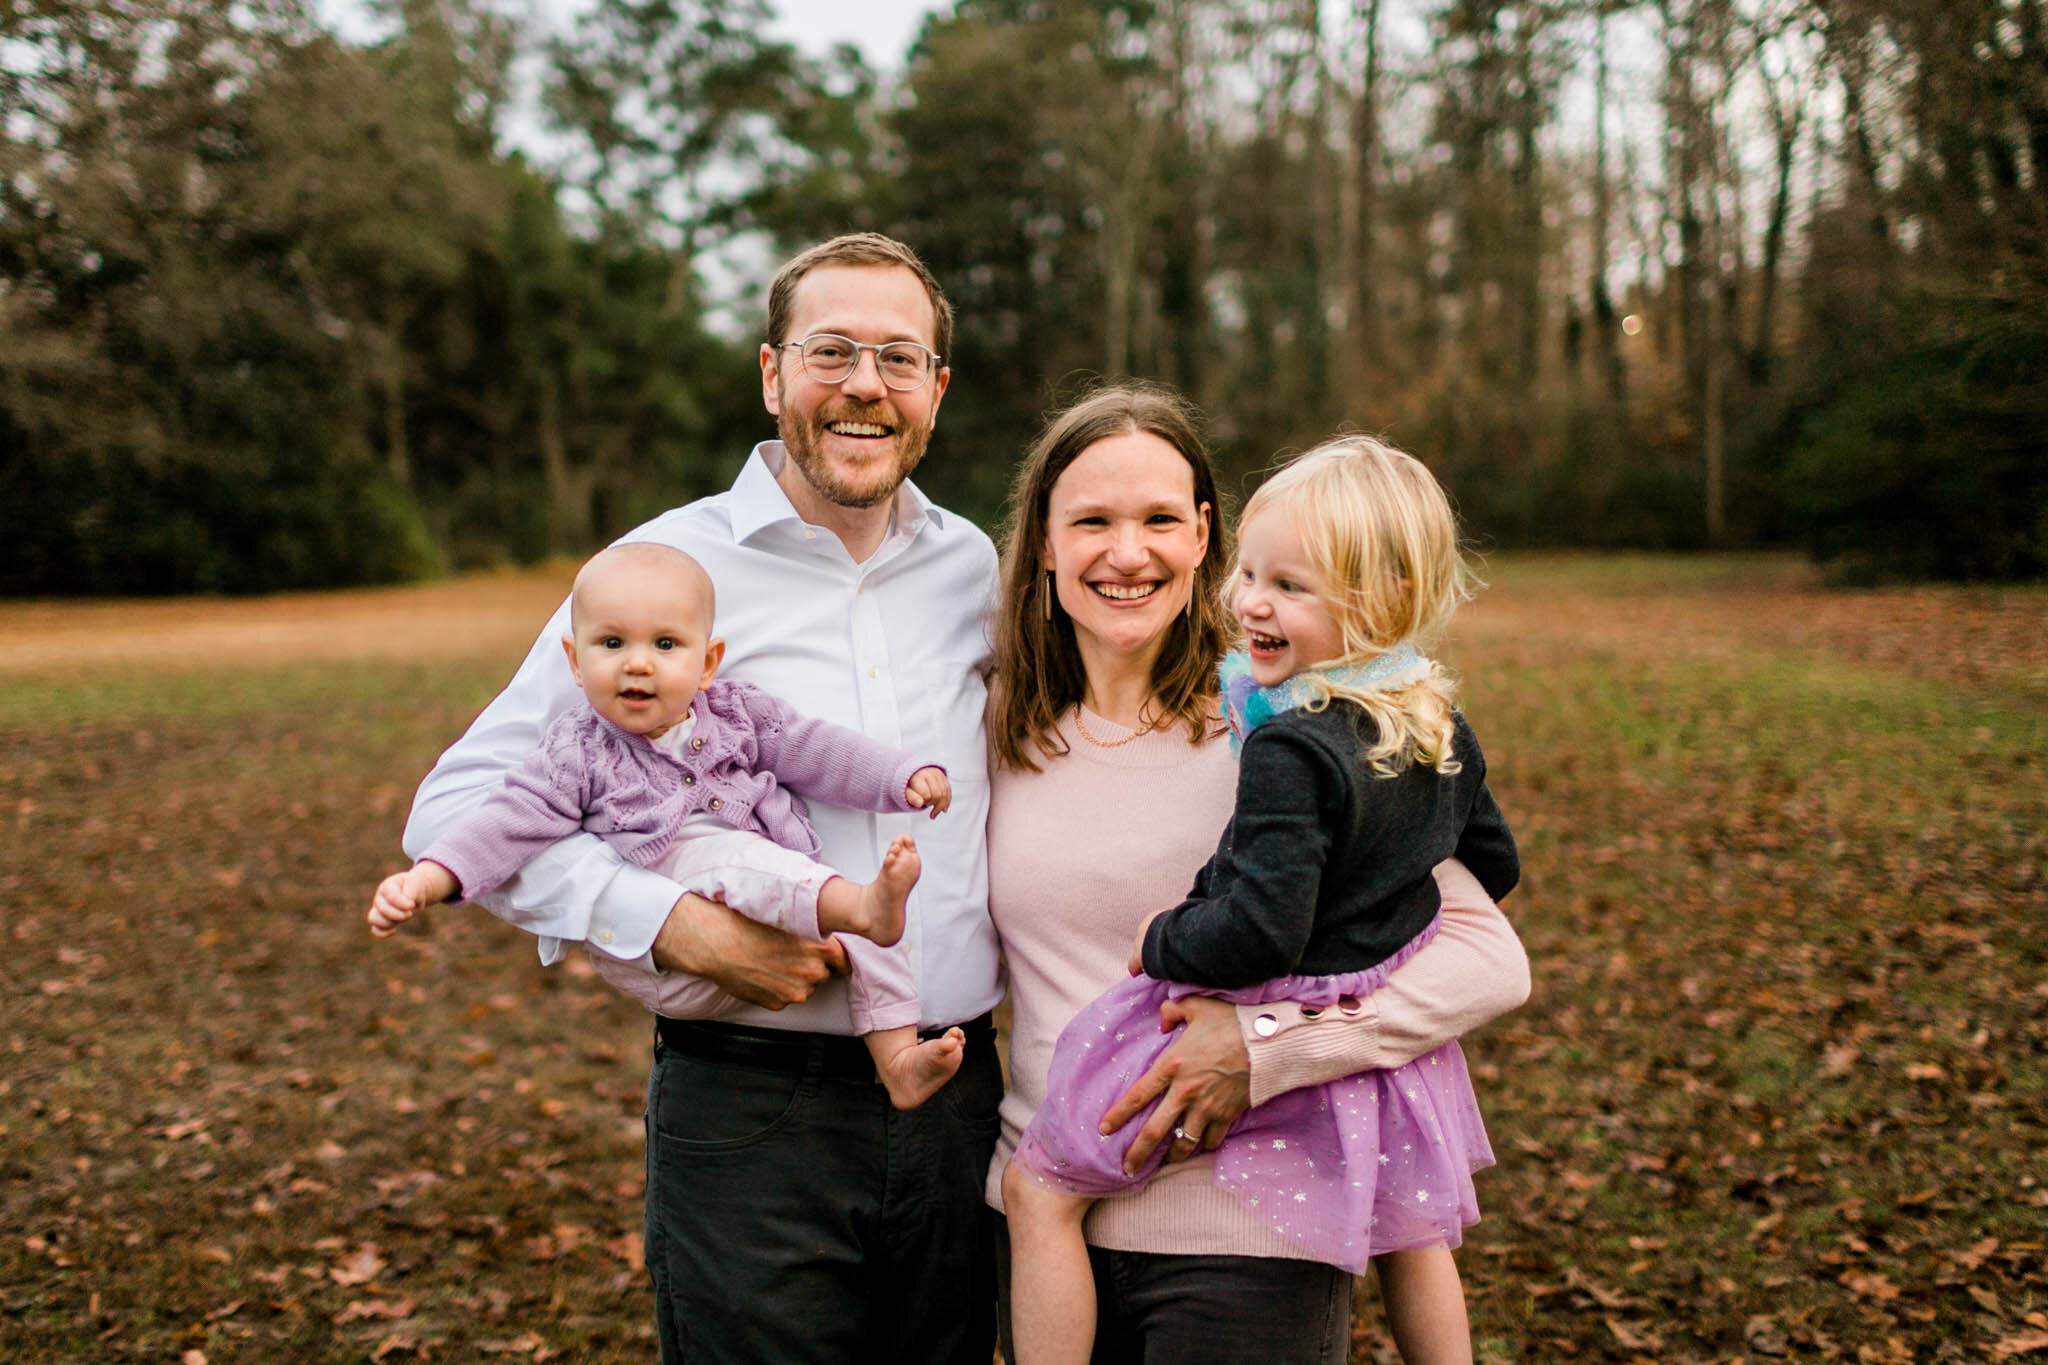 Durham Family Photographer | By G. Lin Photography | Outdoor natural family portrait